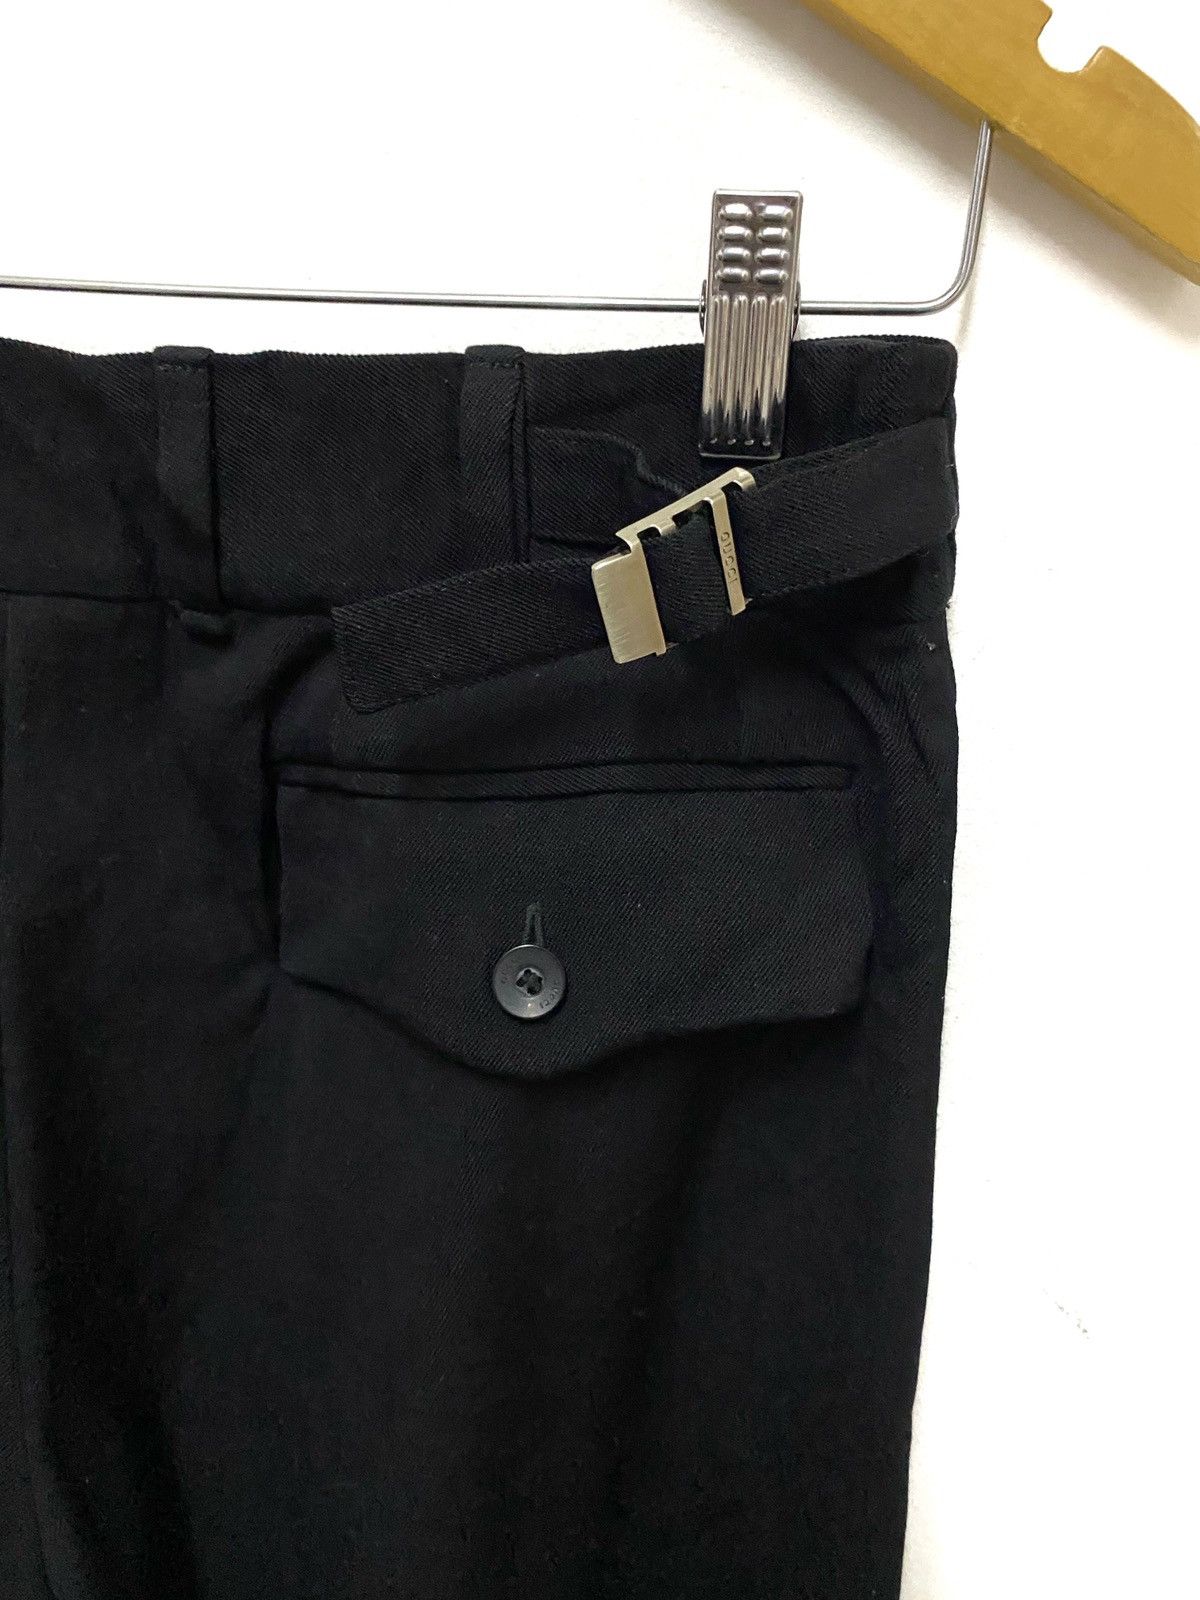 Gucci Lana Wool Pants Made in Italy - 9